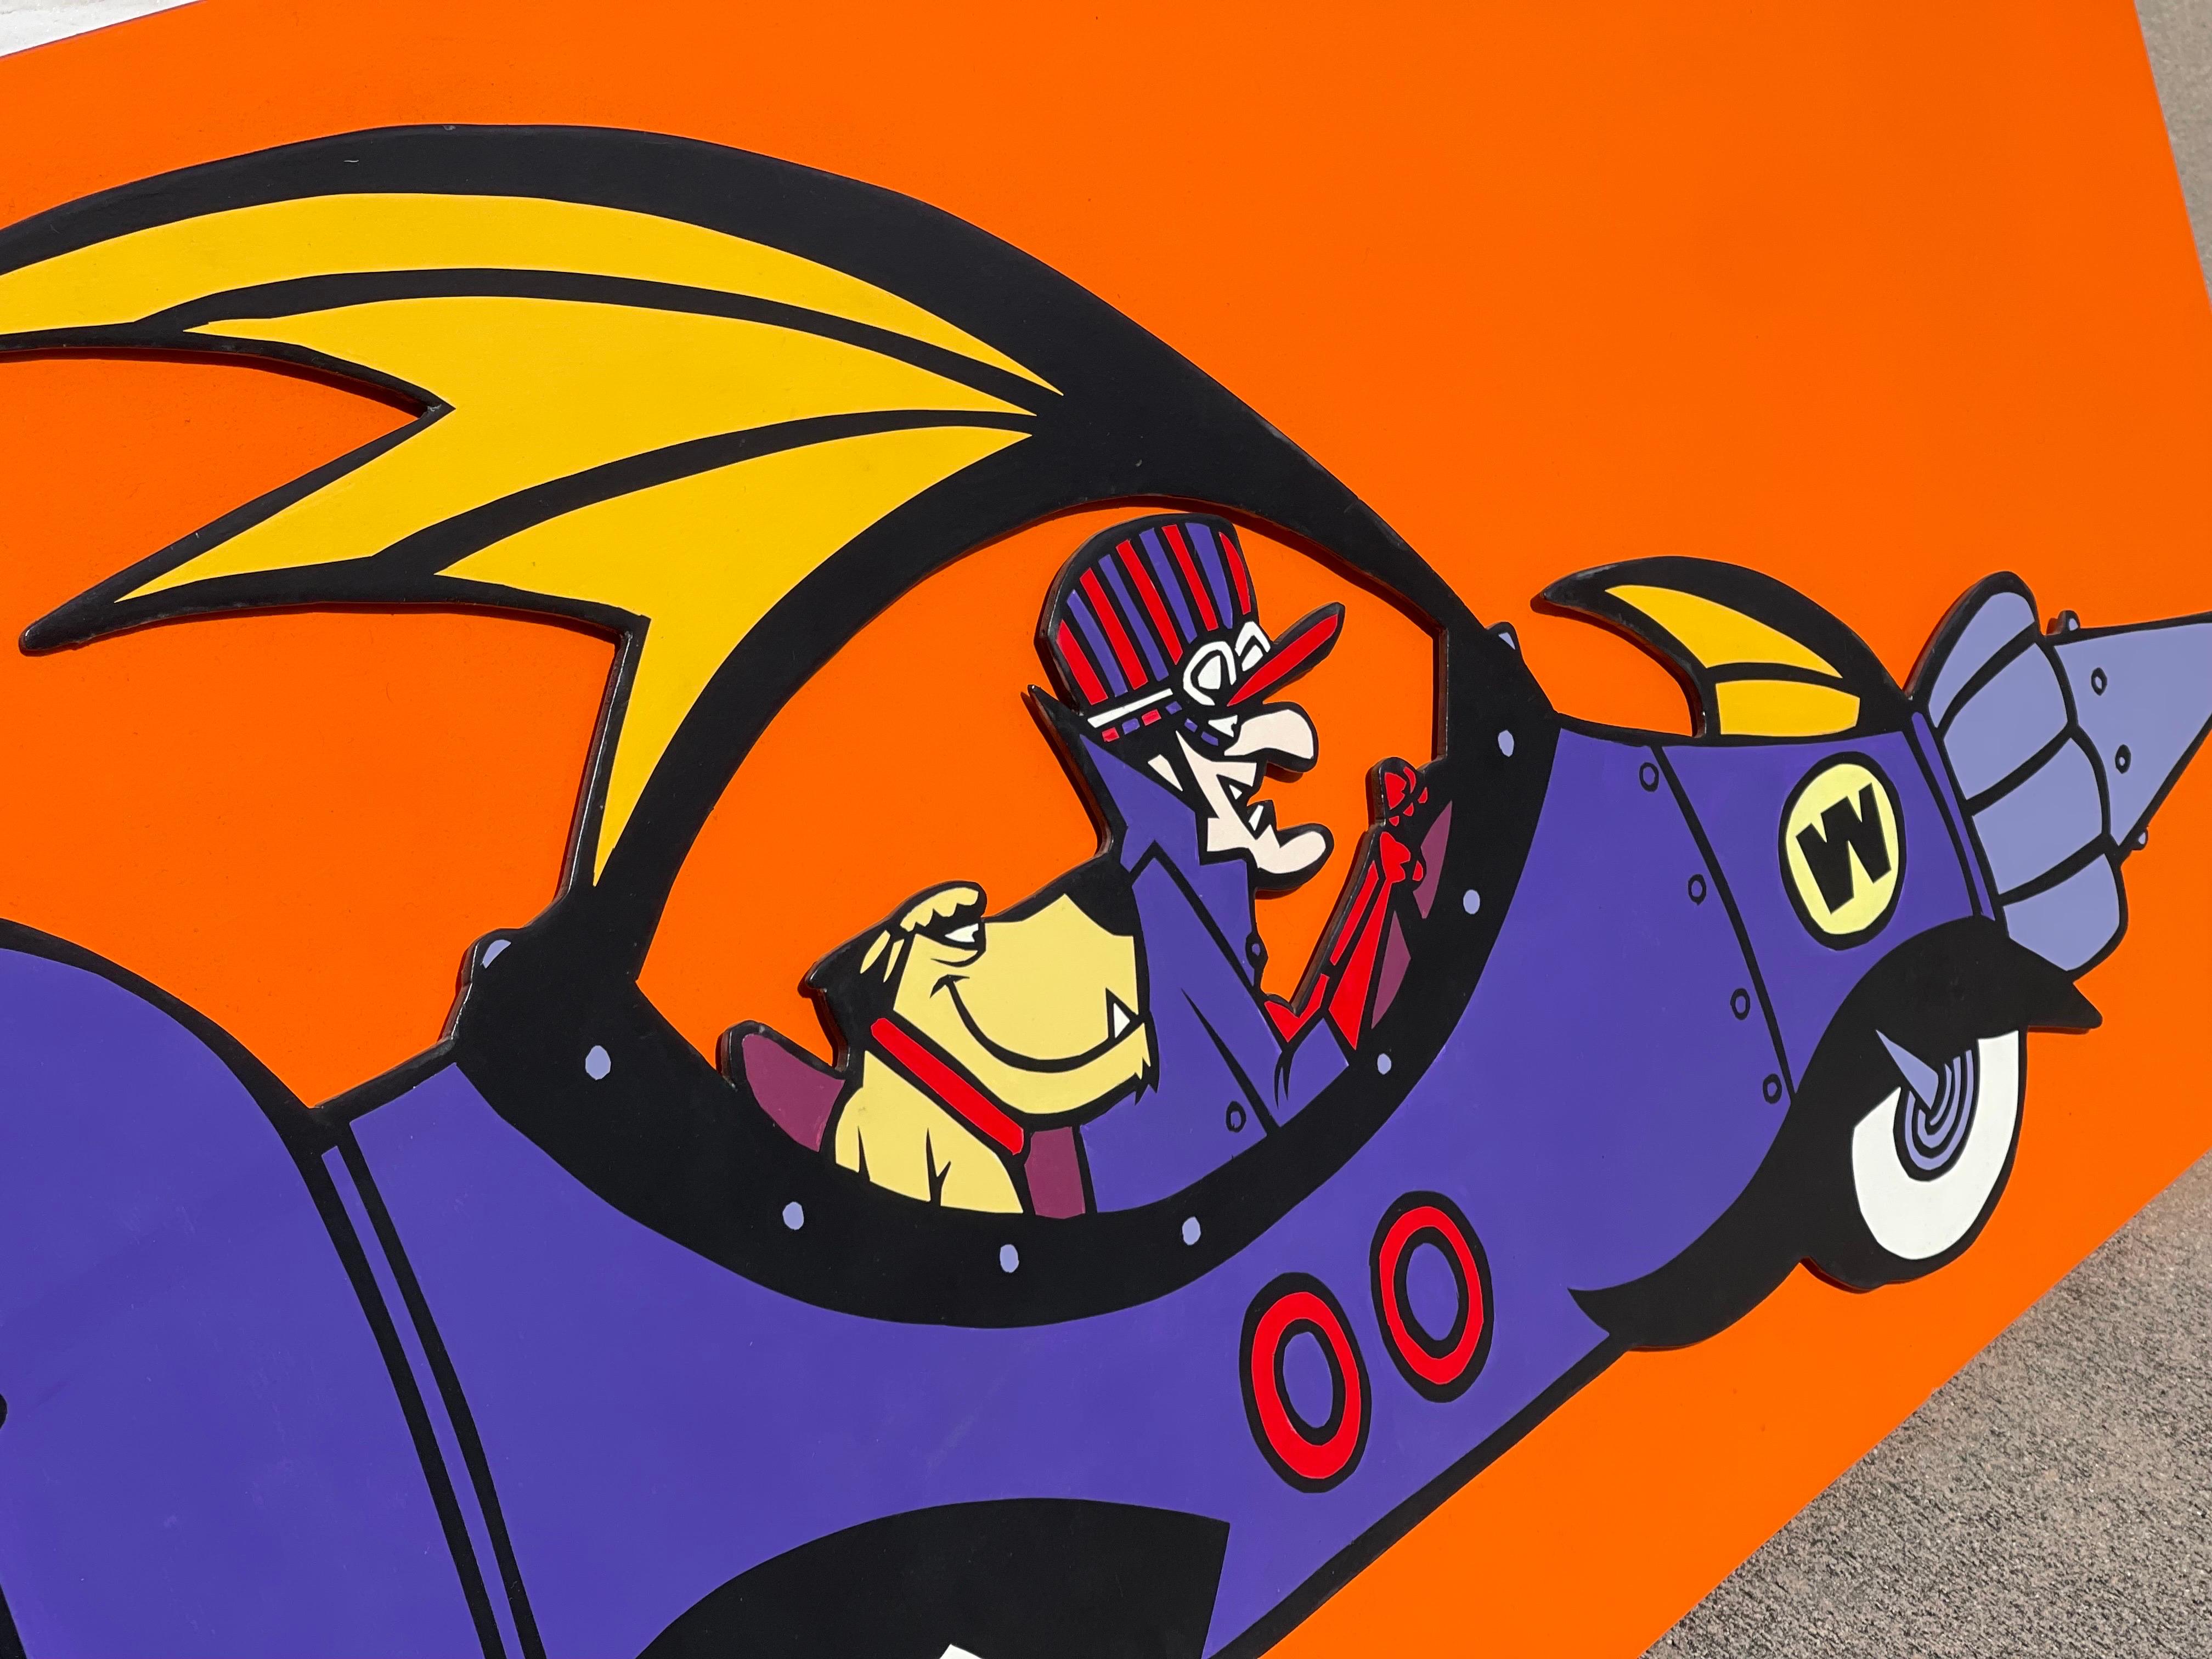 Whimsical recreation of the iconic Dick Dastardly and his trusty sidekick Muttley. Through clever use of paint, wood, and vinyl cutouts, David Travis creates a piece that evokes the nostalgic.